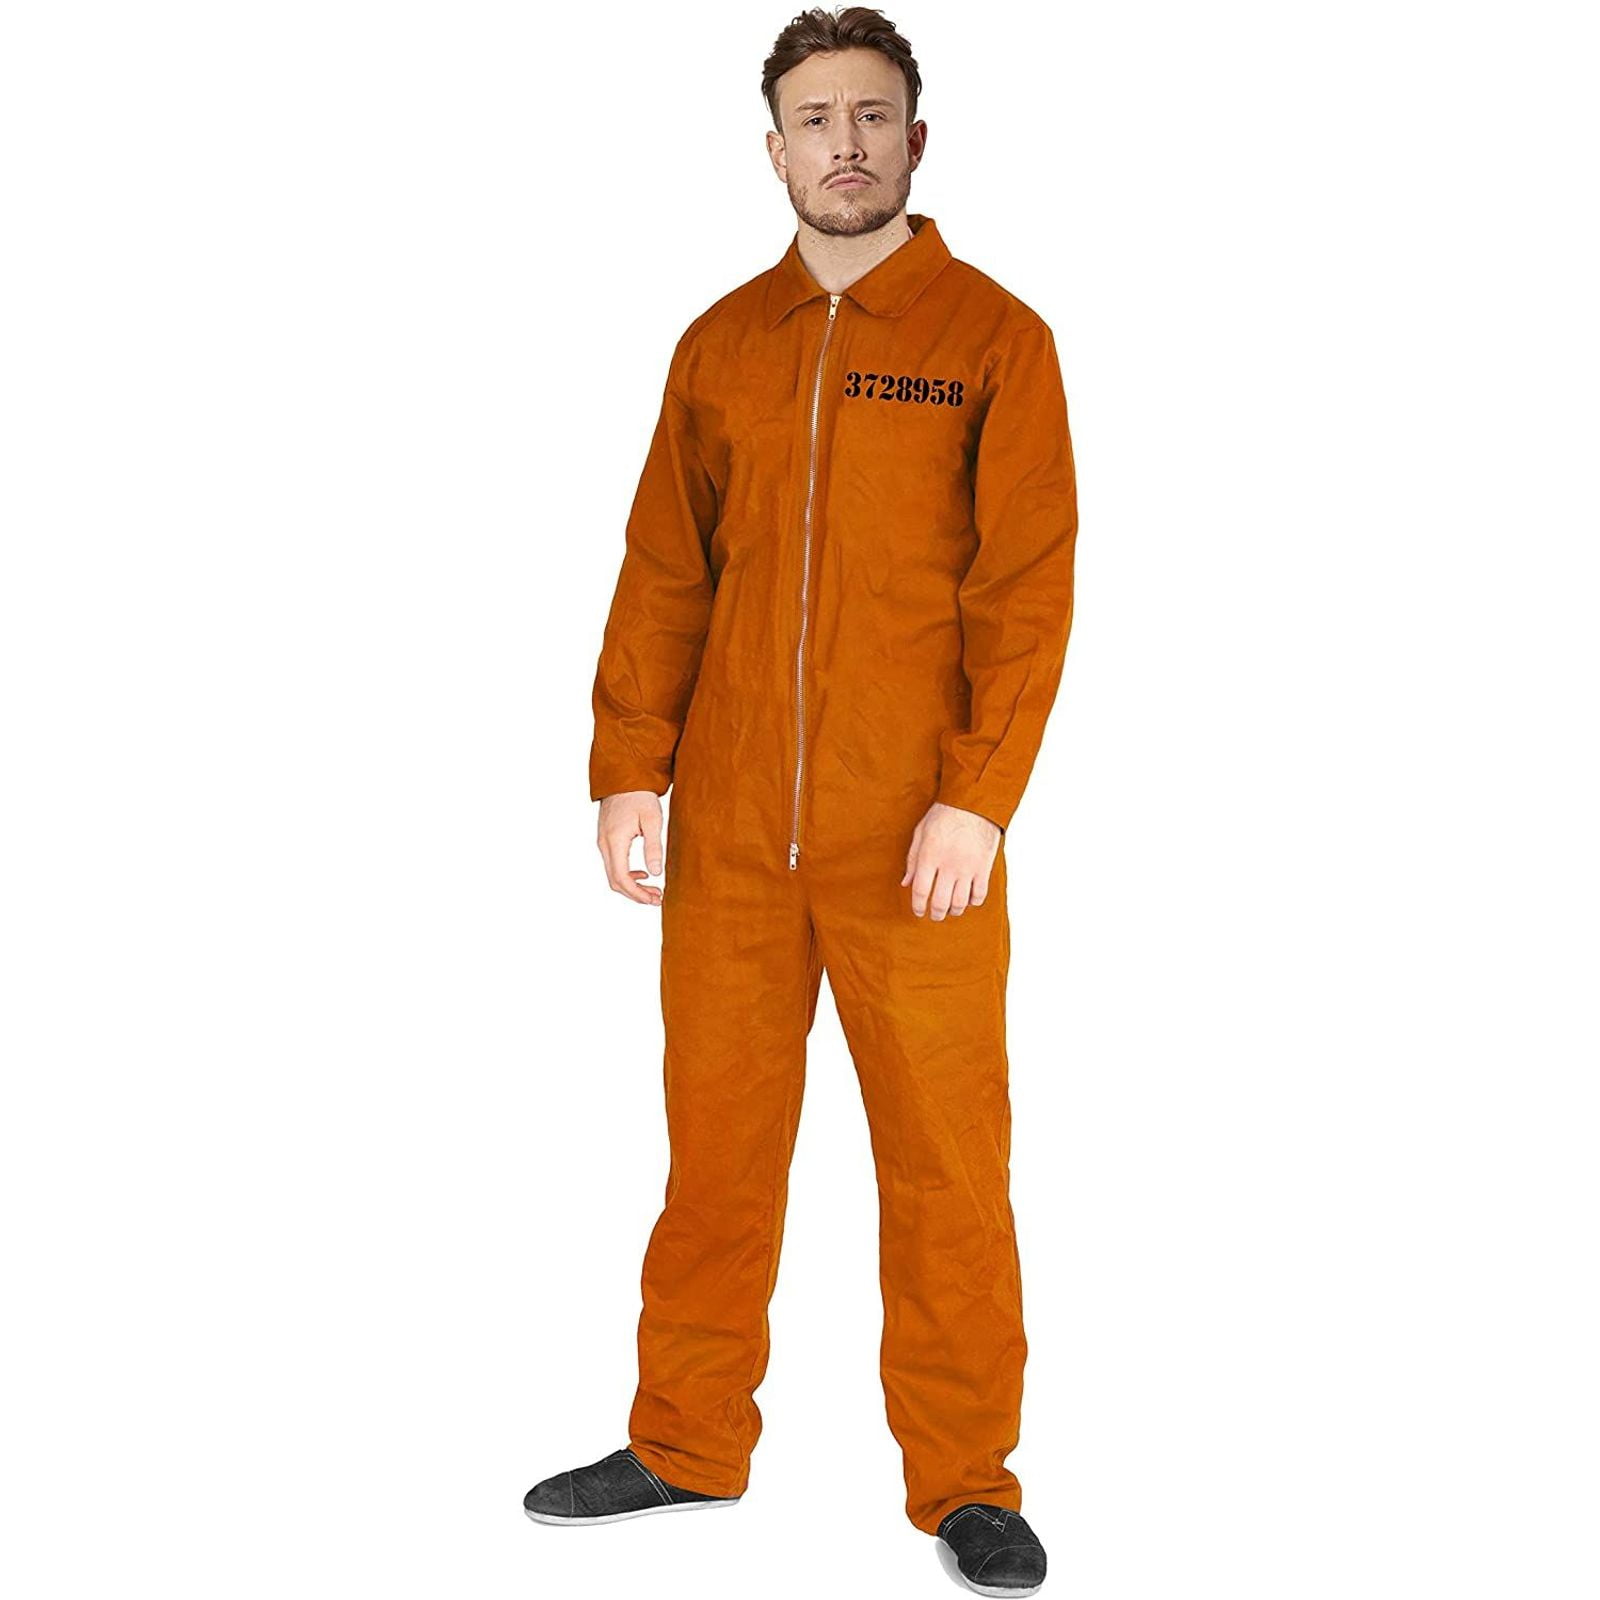 OVERALL TWO PAIRS TROJAN ZIP COVERALL ORANGE  SIZE L APPROX 42/44" TALL 